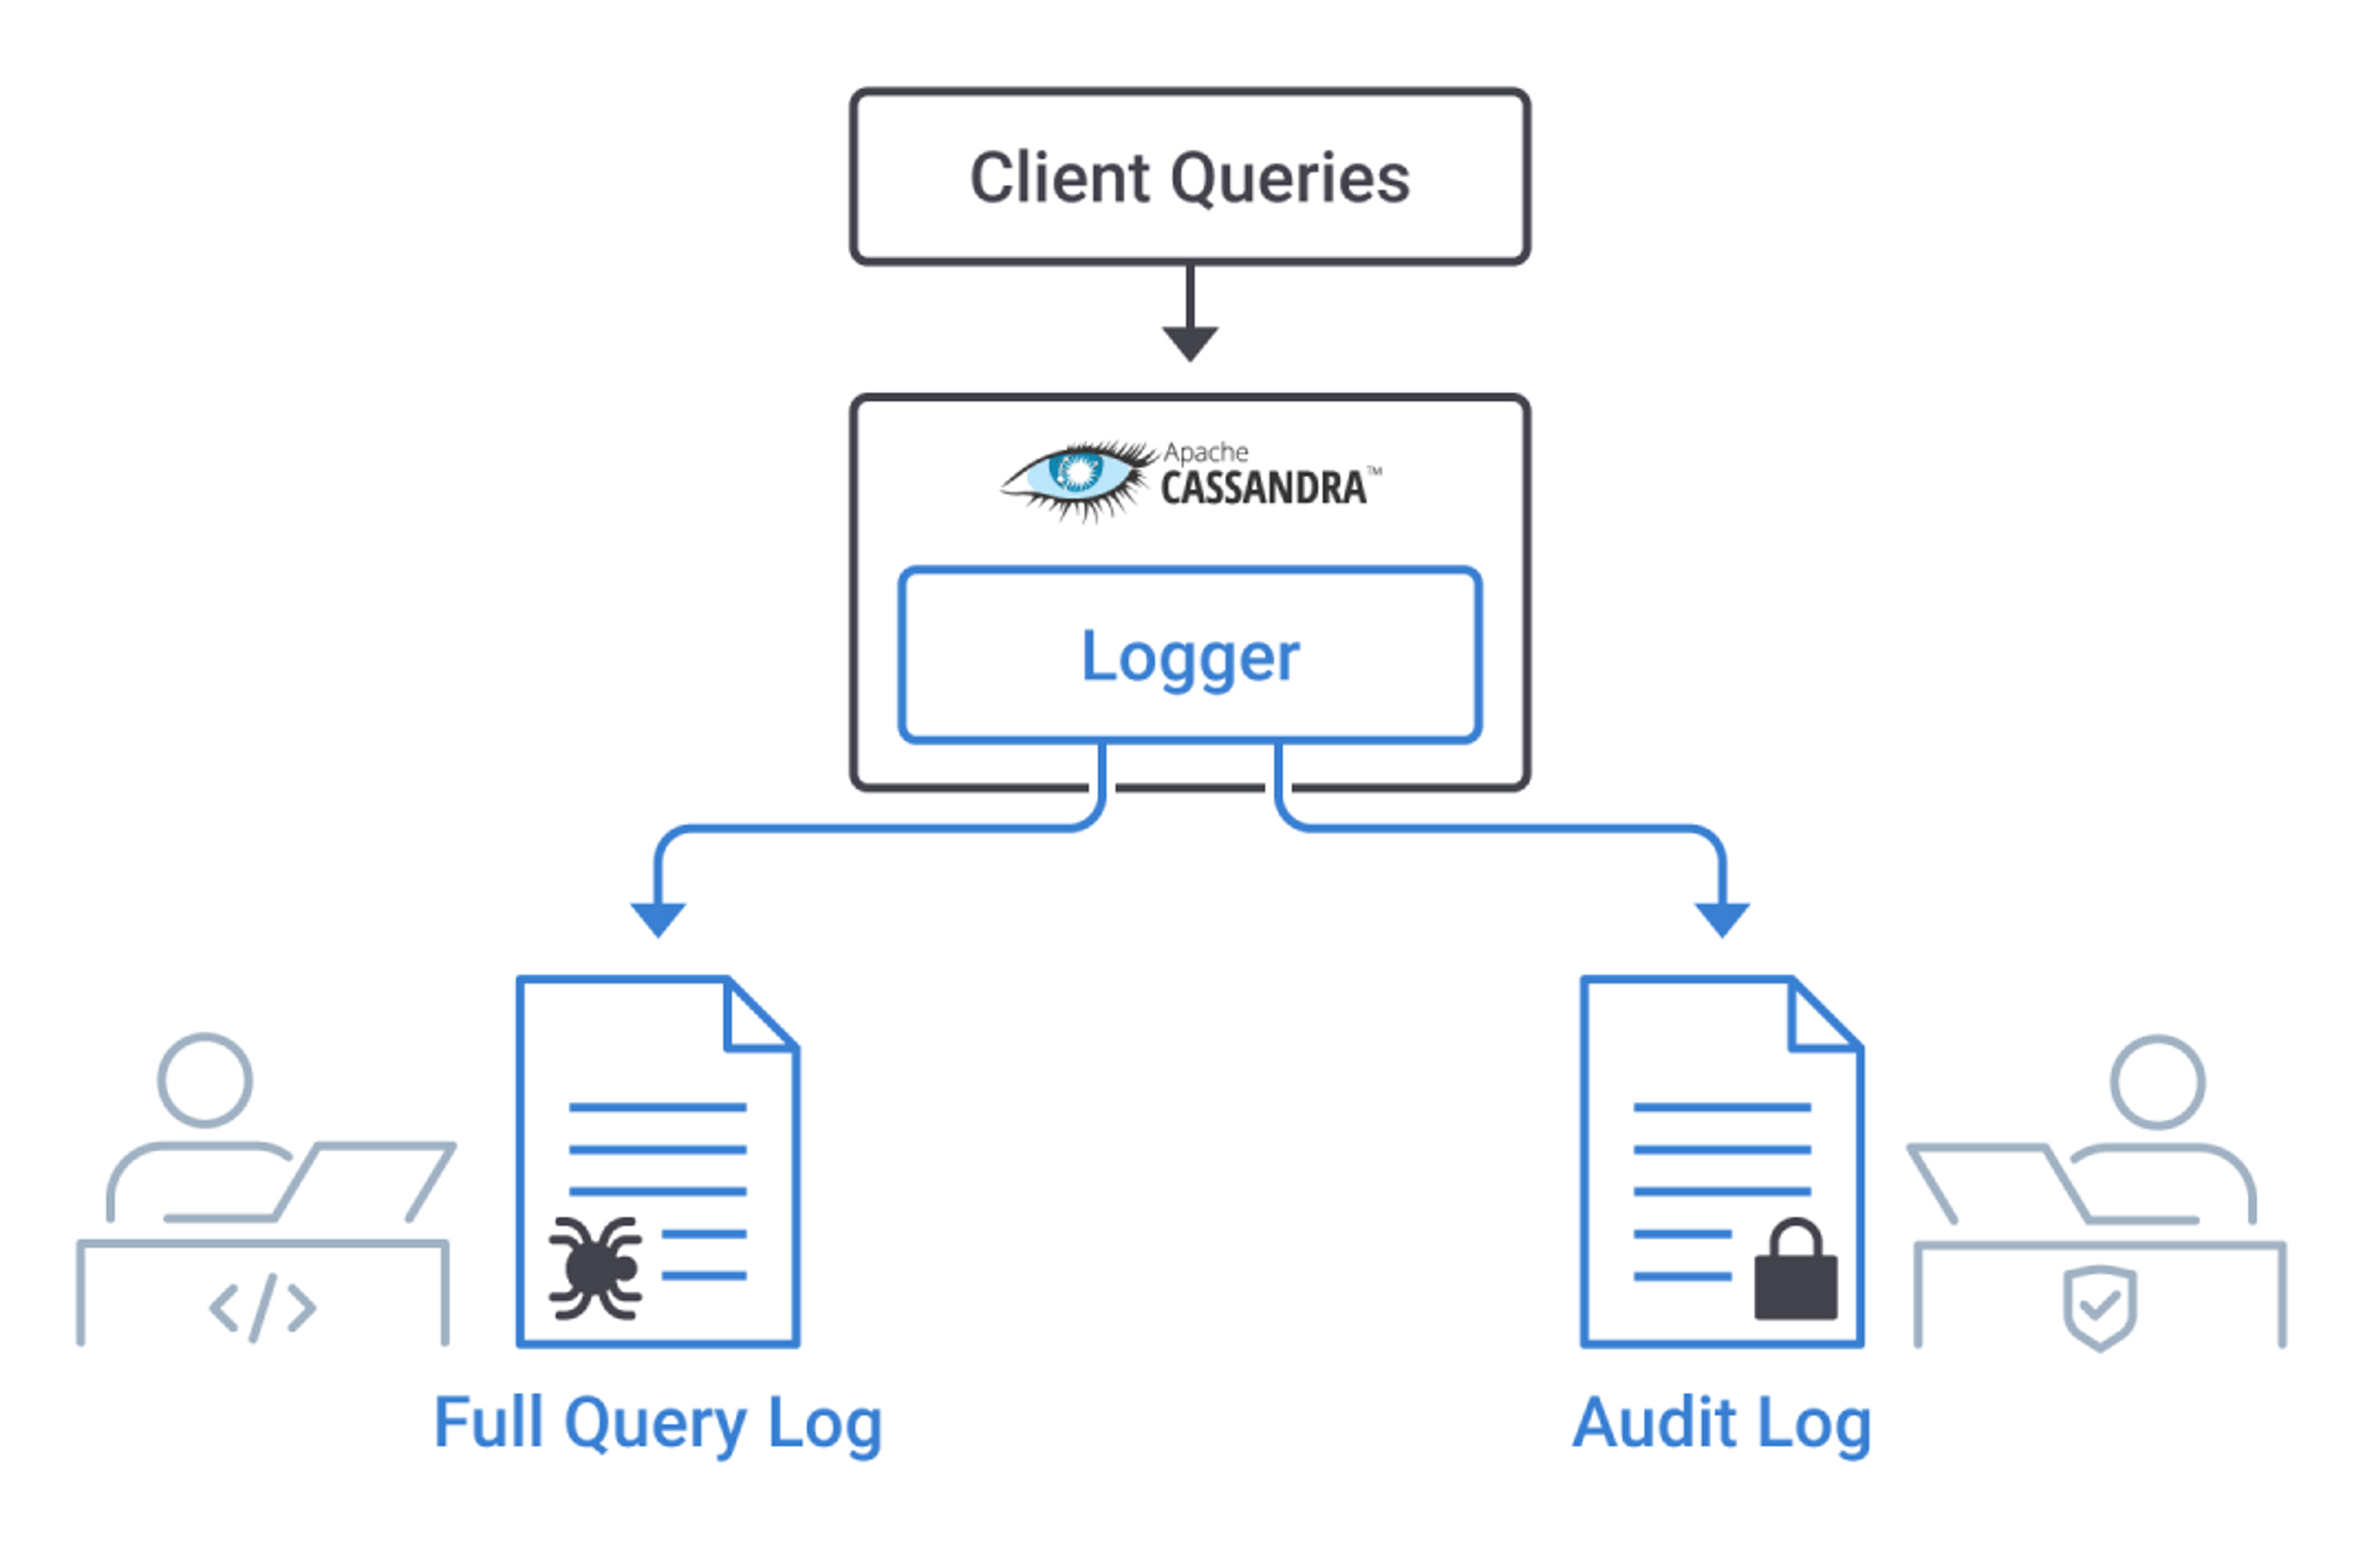 Observability And Security Improvements: Full Query Logging And Audit Logging